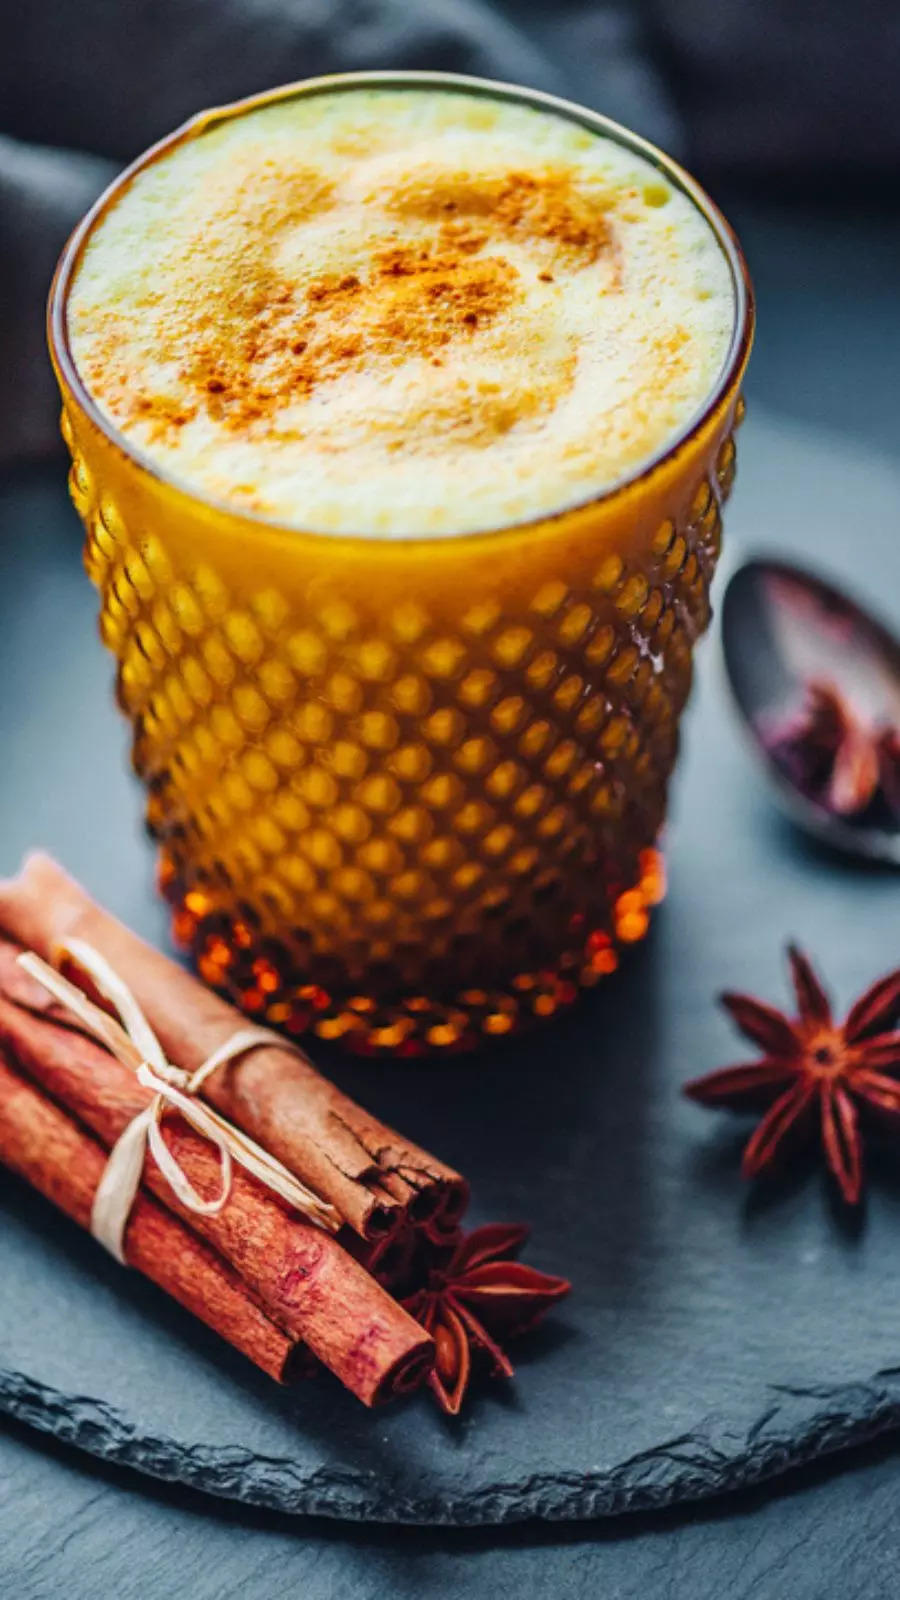 8 reasons why you should drink turmeric milk everyday